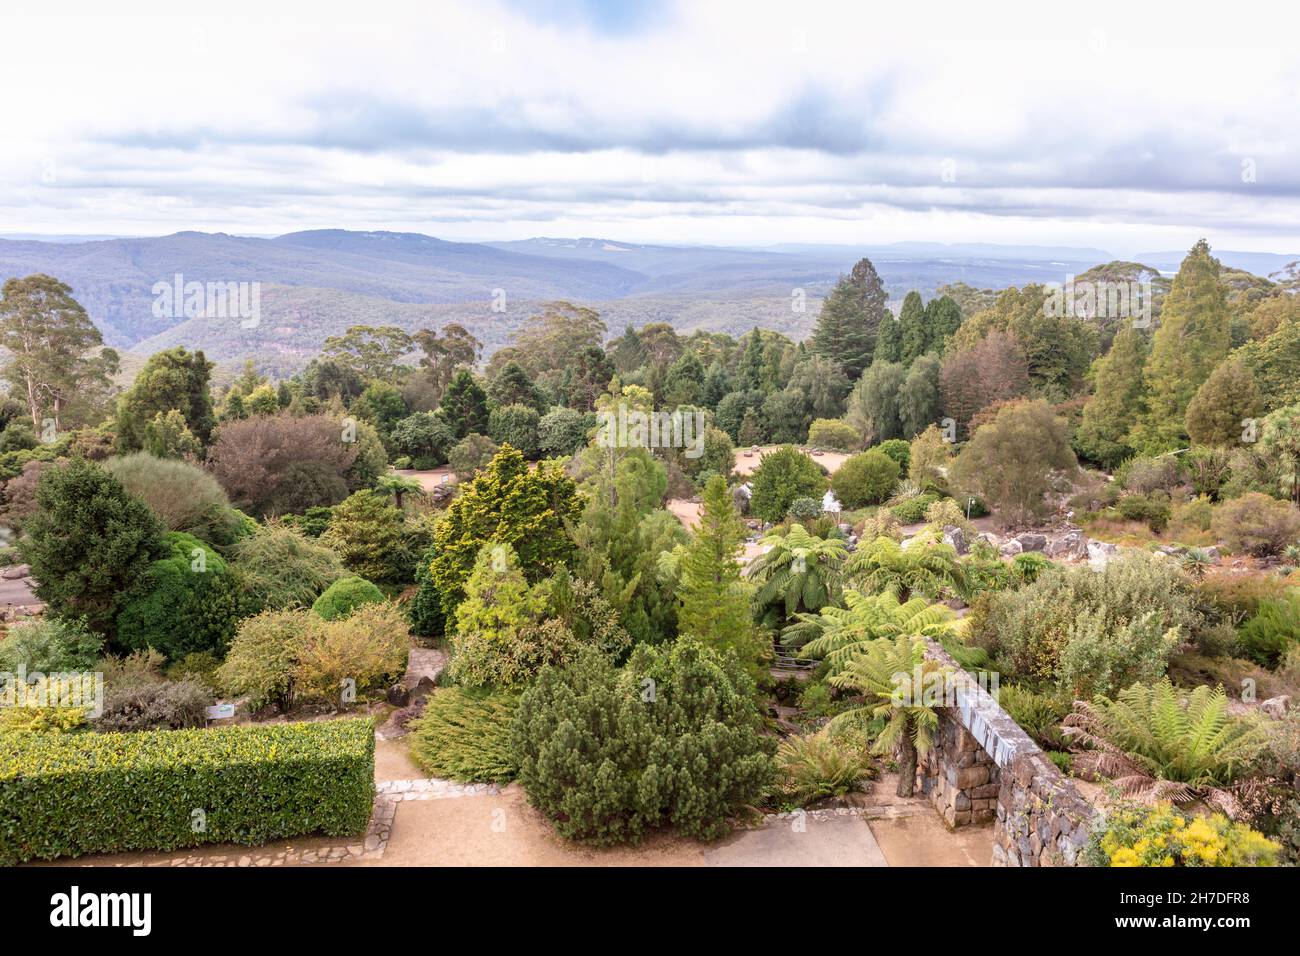 Scenic view at the Blue Mountains Botanic Gardens located at Mount Tomah, New South Wales, Australia. Stock Photo